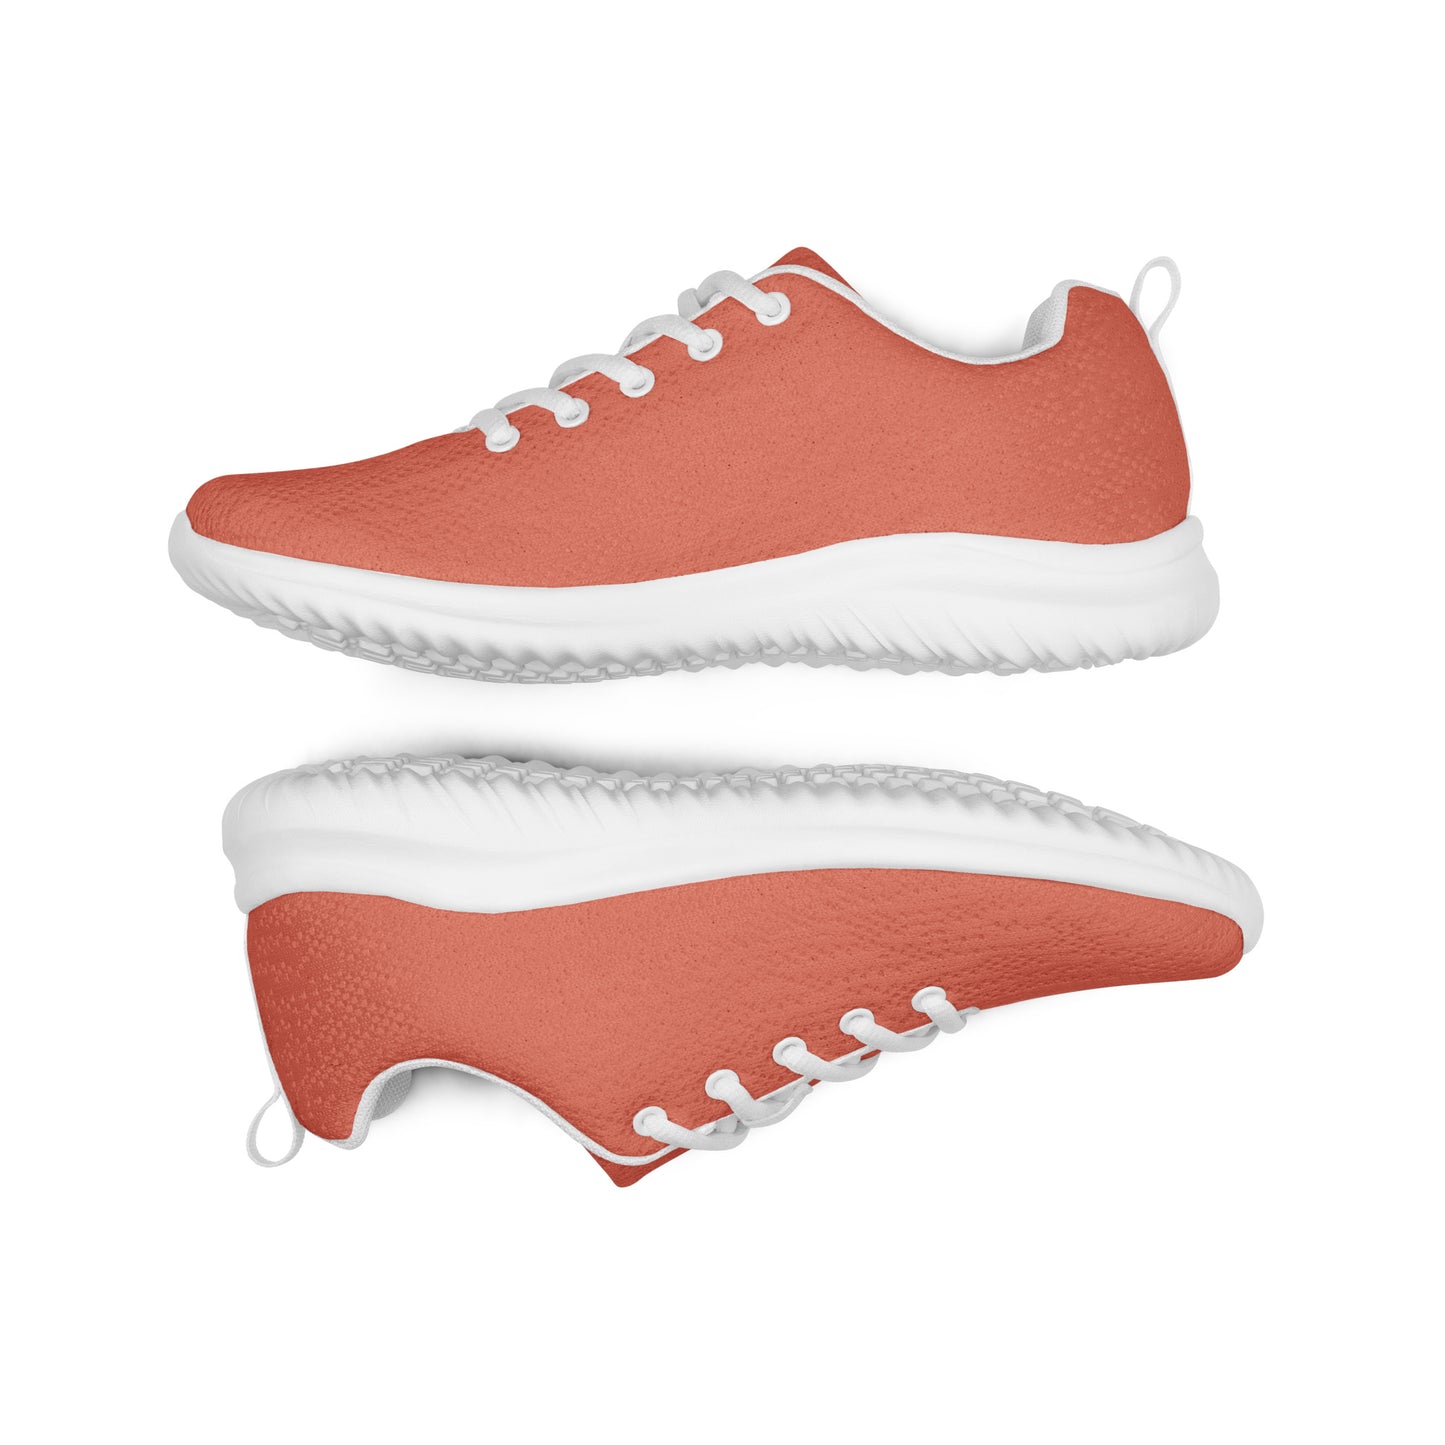 Snooty Fox Art Women’s Athletic Shoes - Peach Pink Color